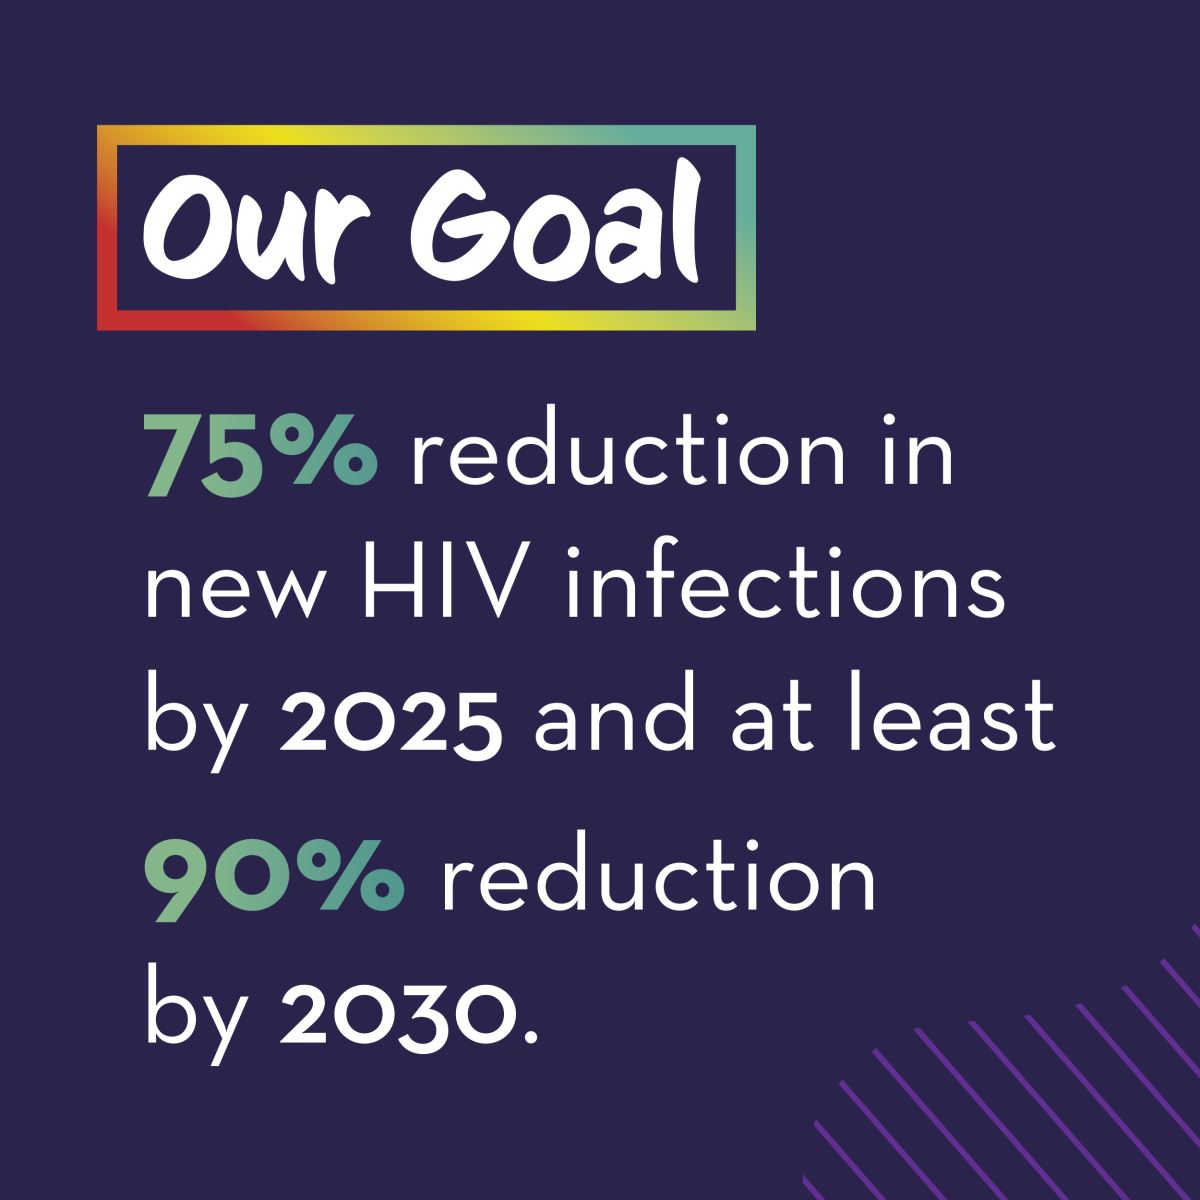 Our goal - 75% reduction in new HIV infections by 2025 and at least 90% reduction by 2030